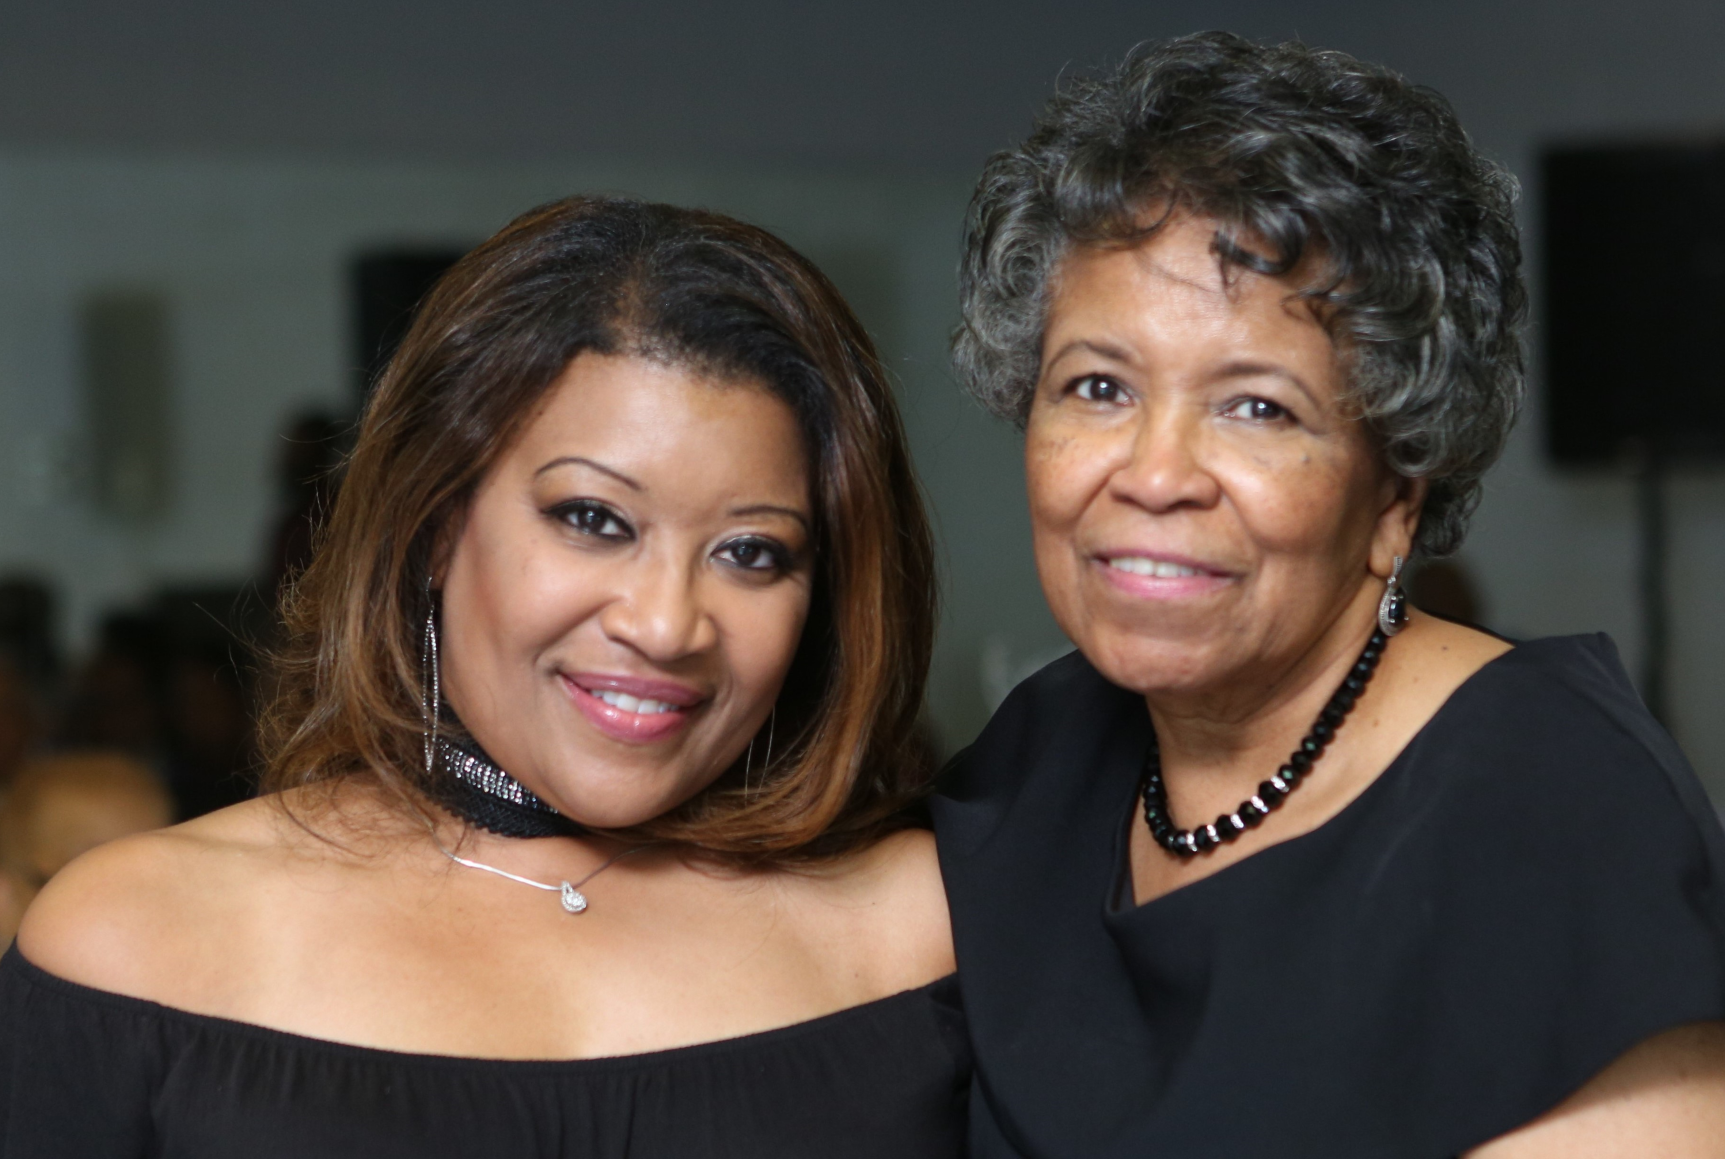 Sharron and her mother, both wearing black formal attire, smile at the camera